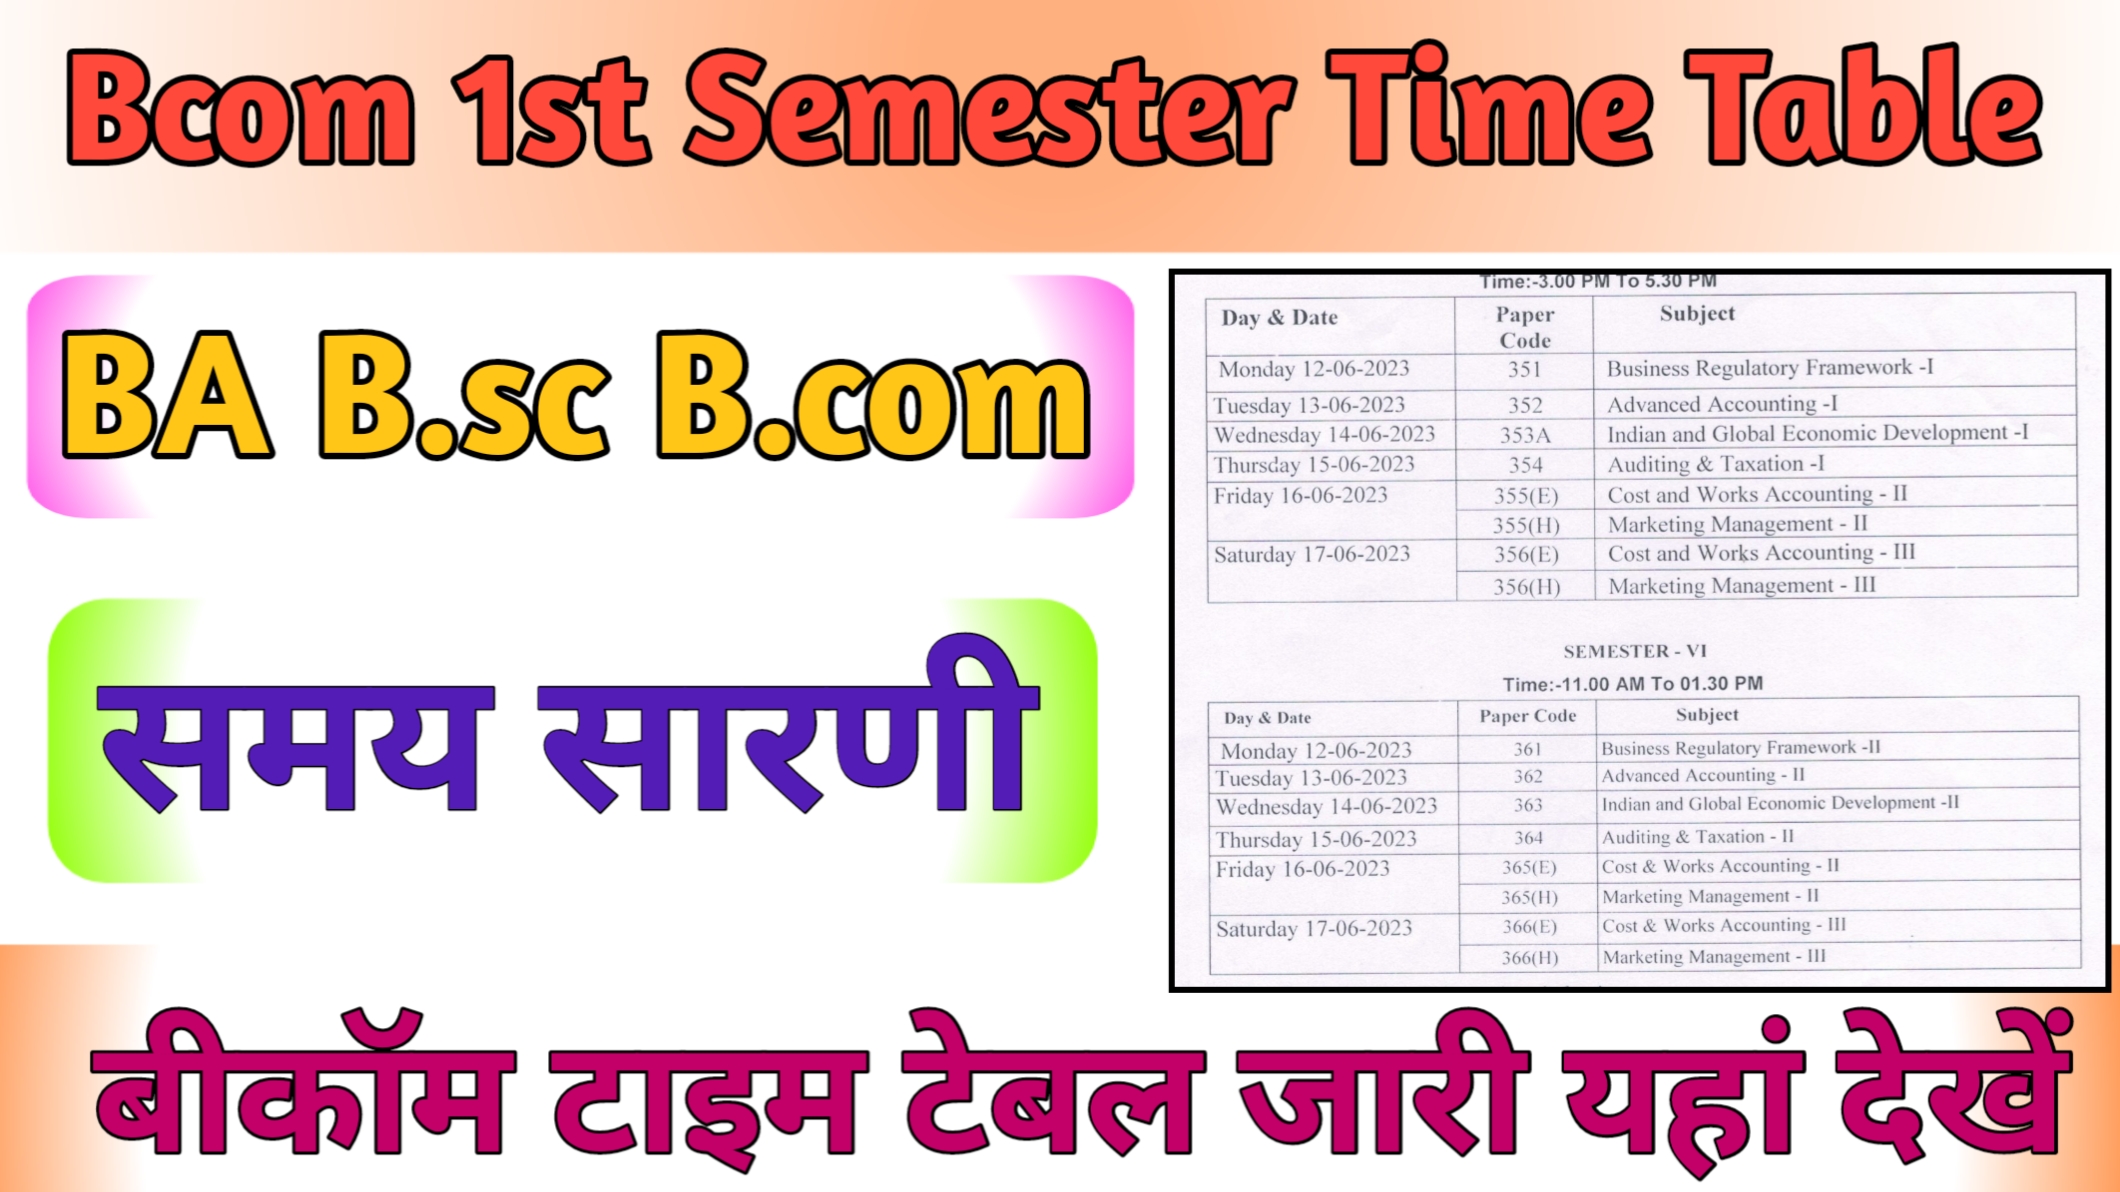 B.com 1st Semester Time Table (Download)